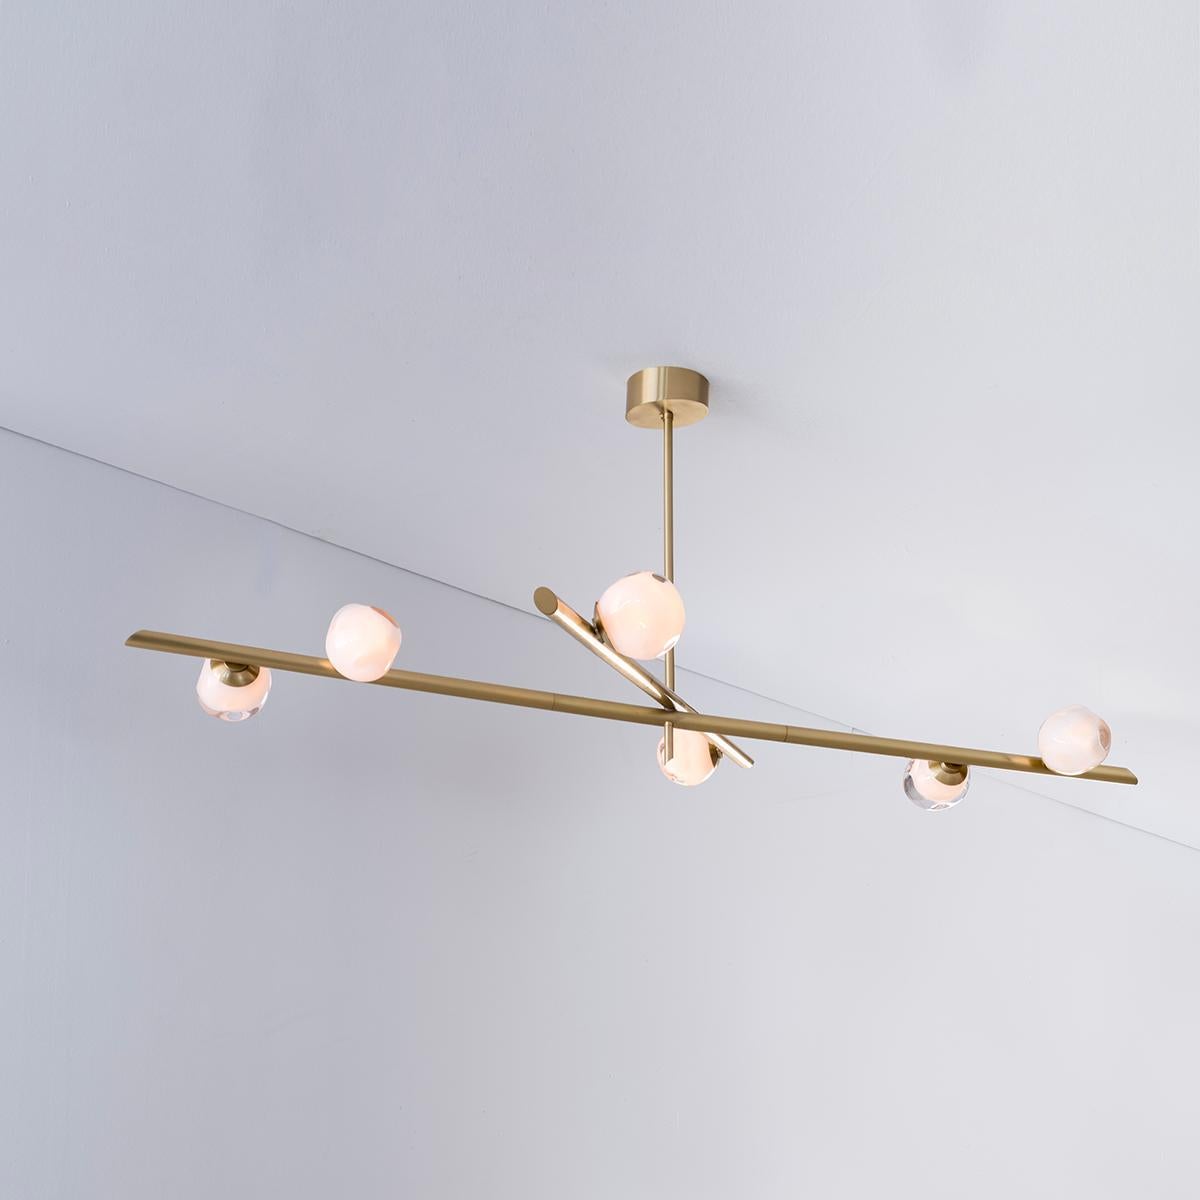 Antares Ceiling Light by Gaspare Asaro-Brunito Nero Finish In New Condition For Sale In New York, NY